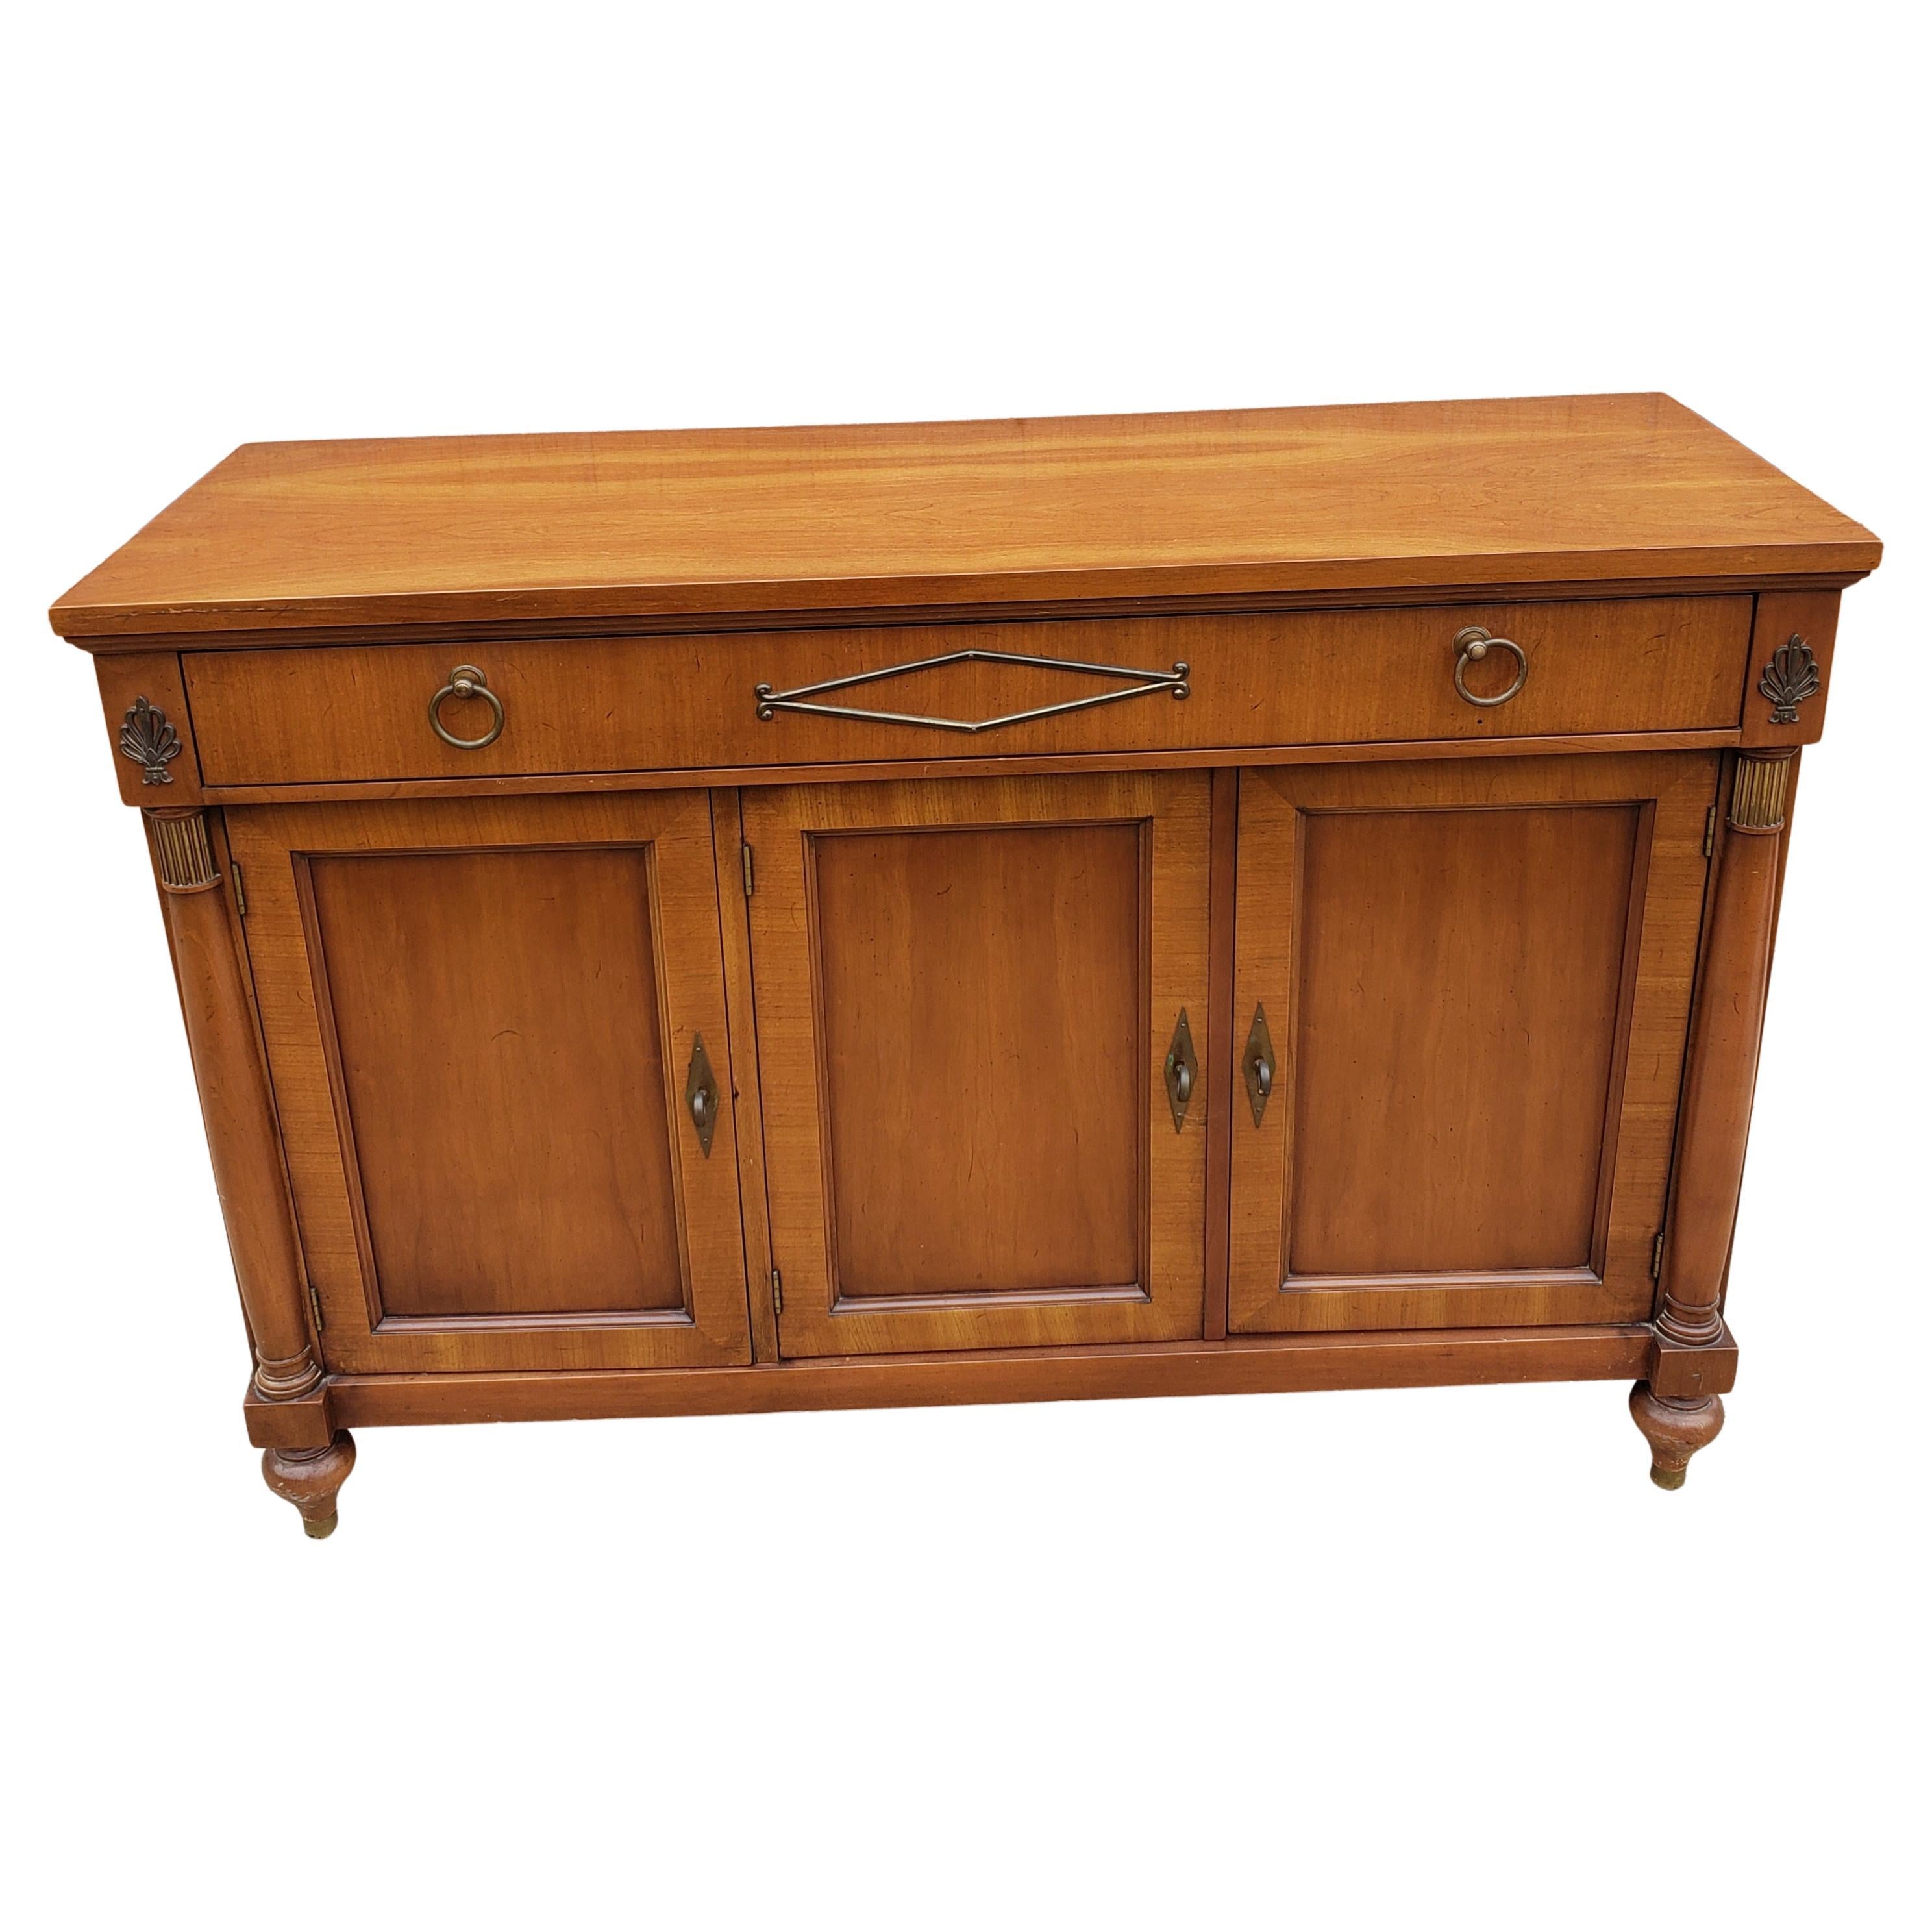 A proportionate Century Furniture Contemporary Biedermeier Style Fruitwood Buffet in very good vintage condition. Measures 48